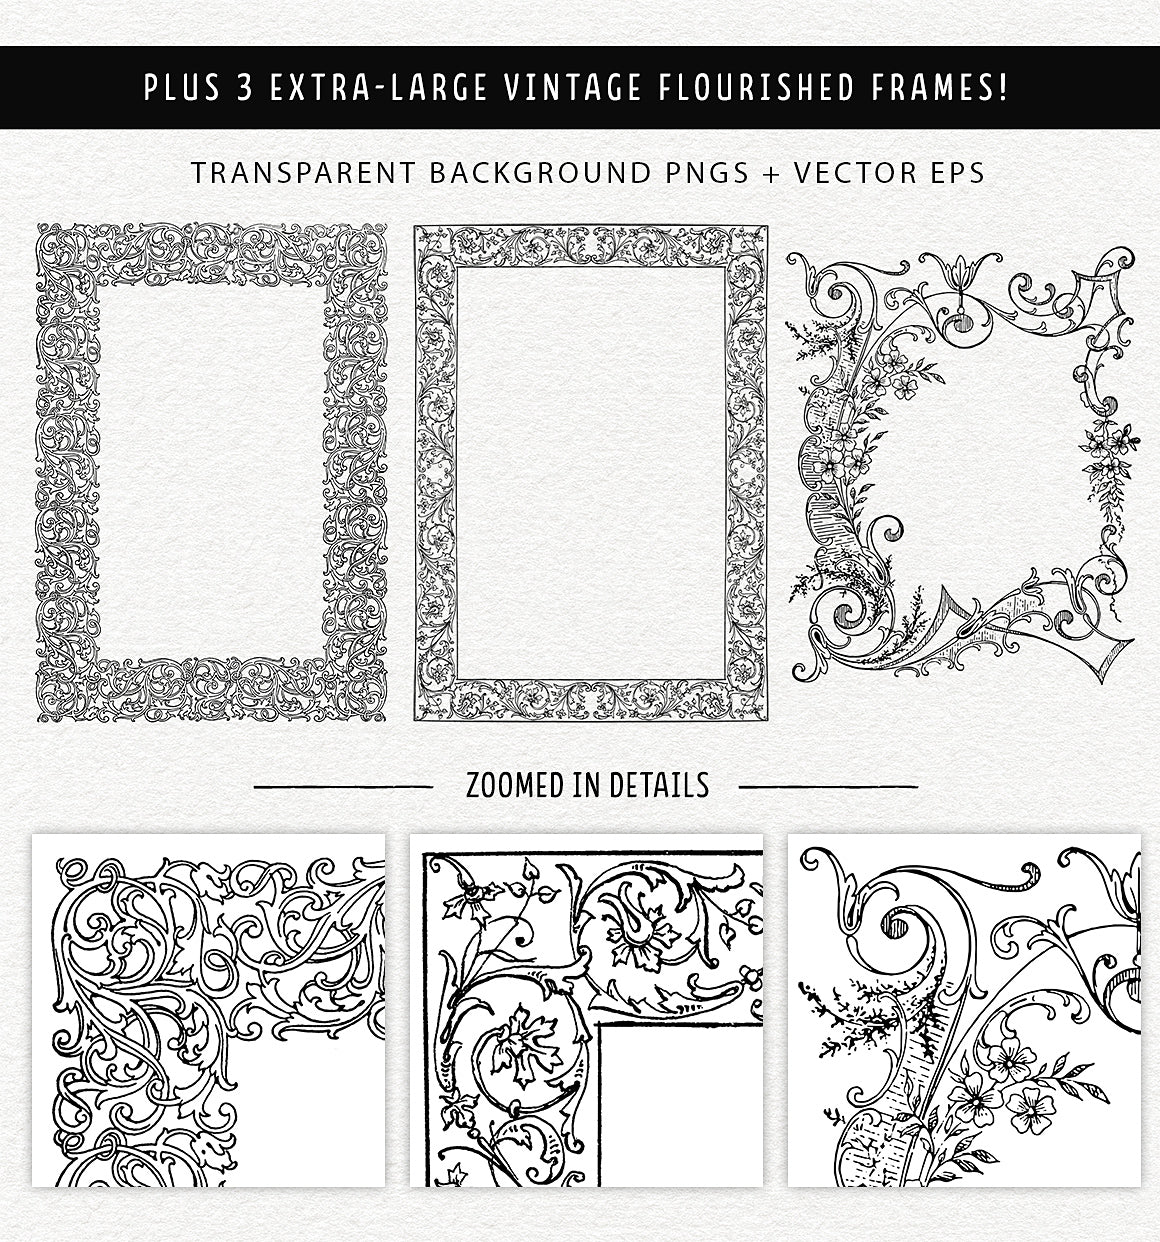 Large vintage flourish frames or border overlays and vector graphics.